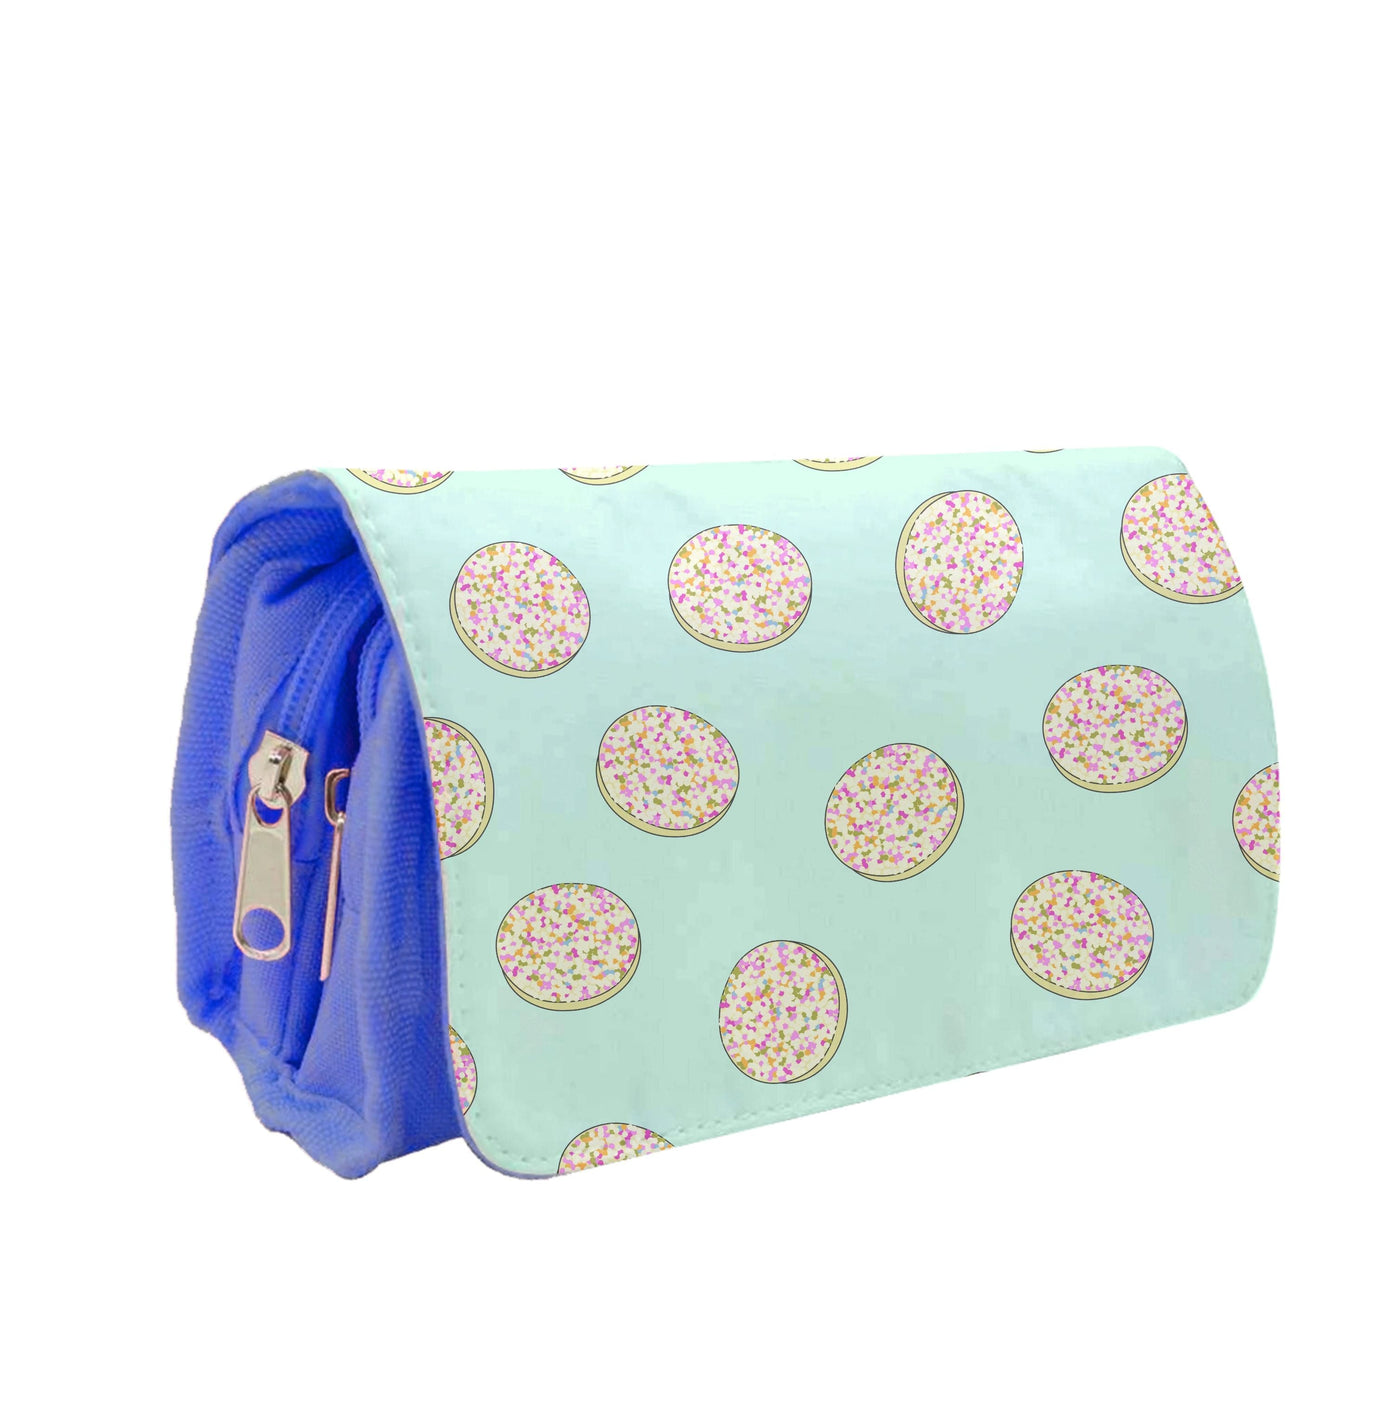 Jazzles - Sweets Patterns Pencil Case